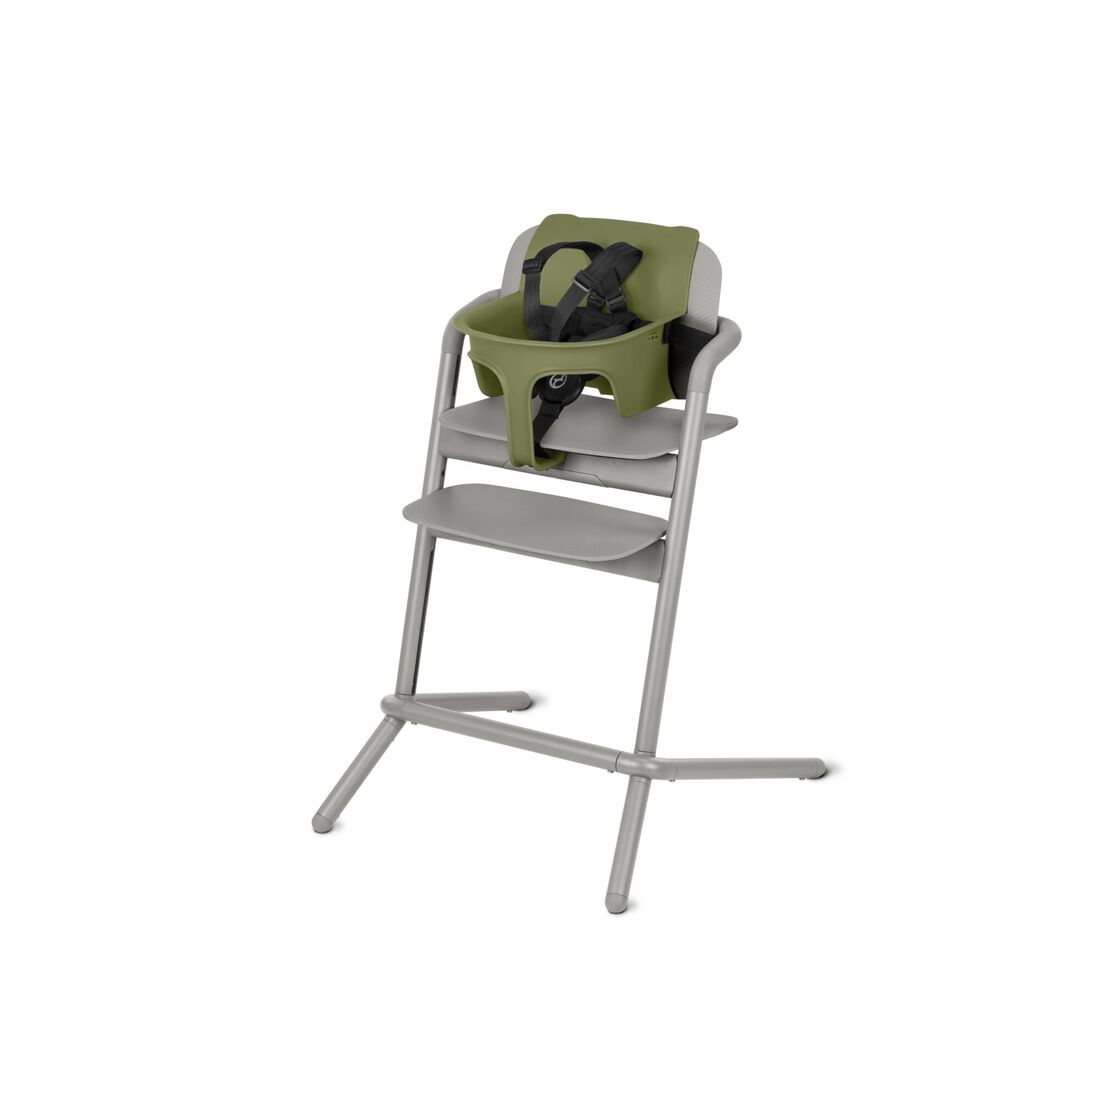 CYBEX Lemo Baby Set 2 - Outback Green in Outback Green large image number 1